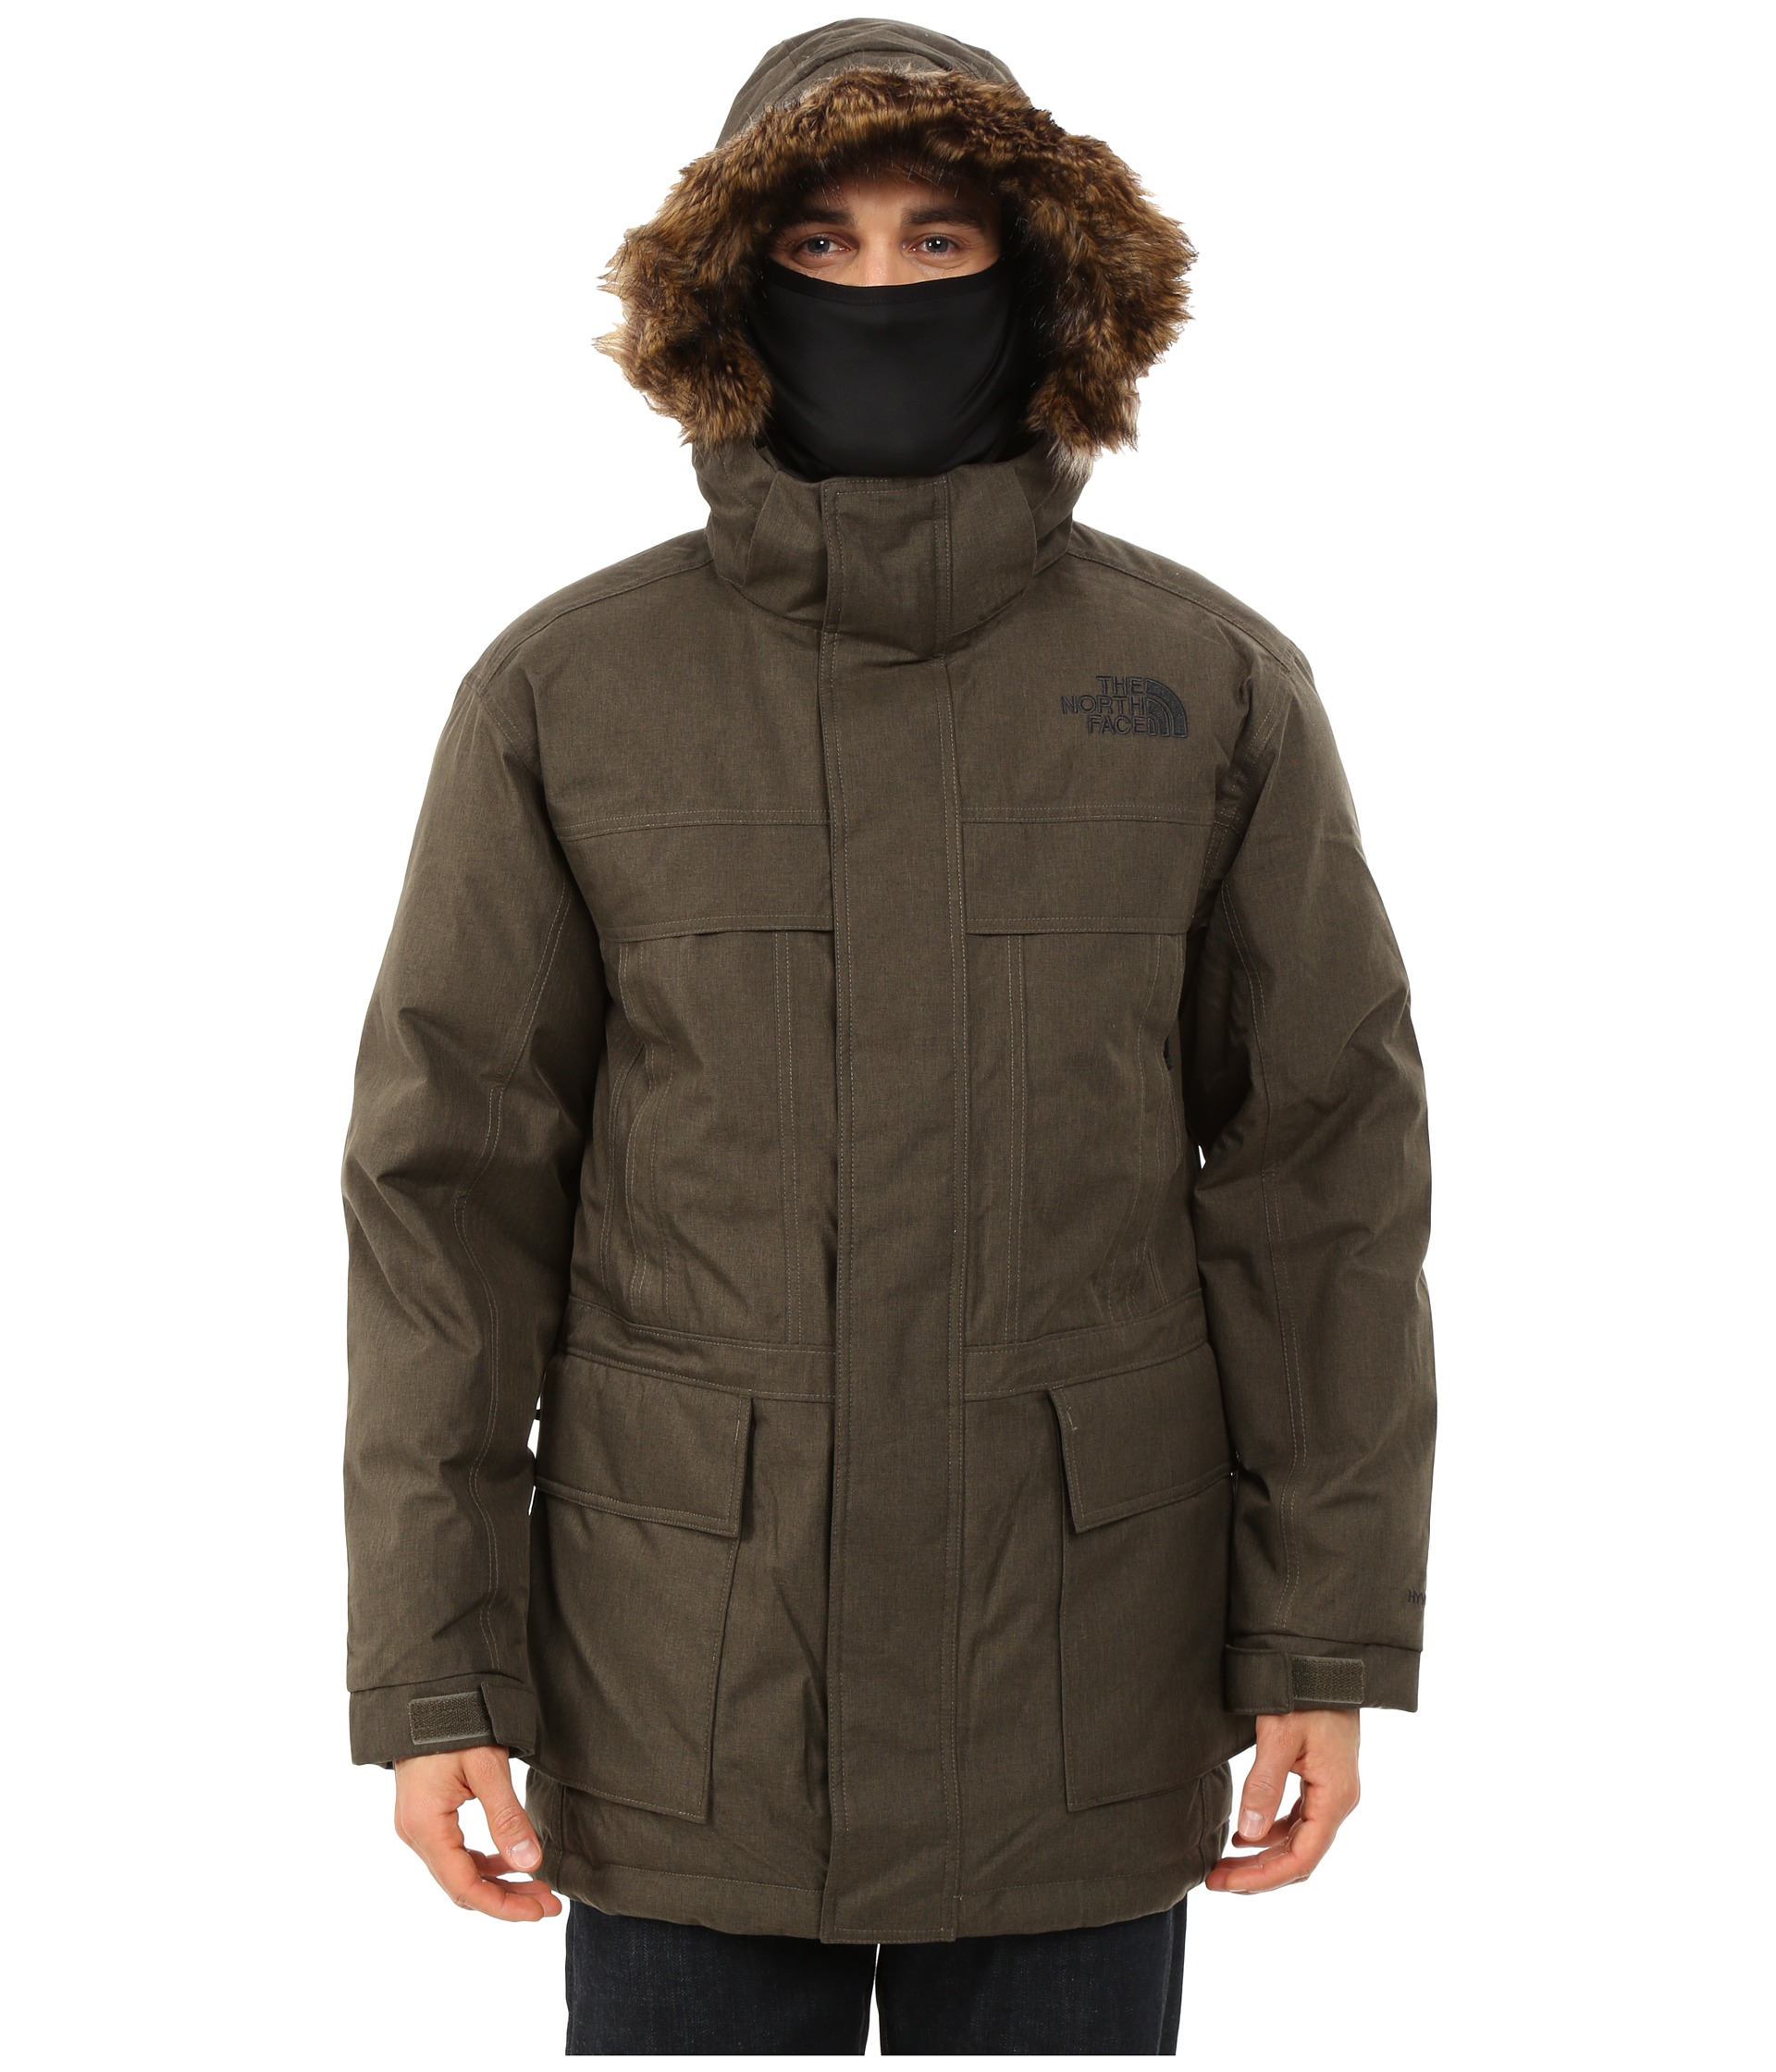 Lyst - The North Face Mcmurdo Parka Ii in Brown for Men